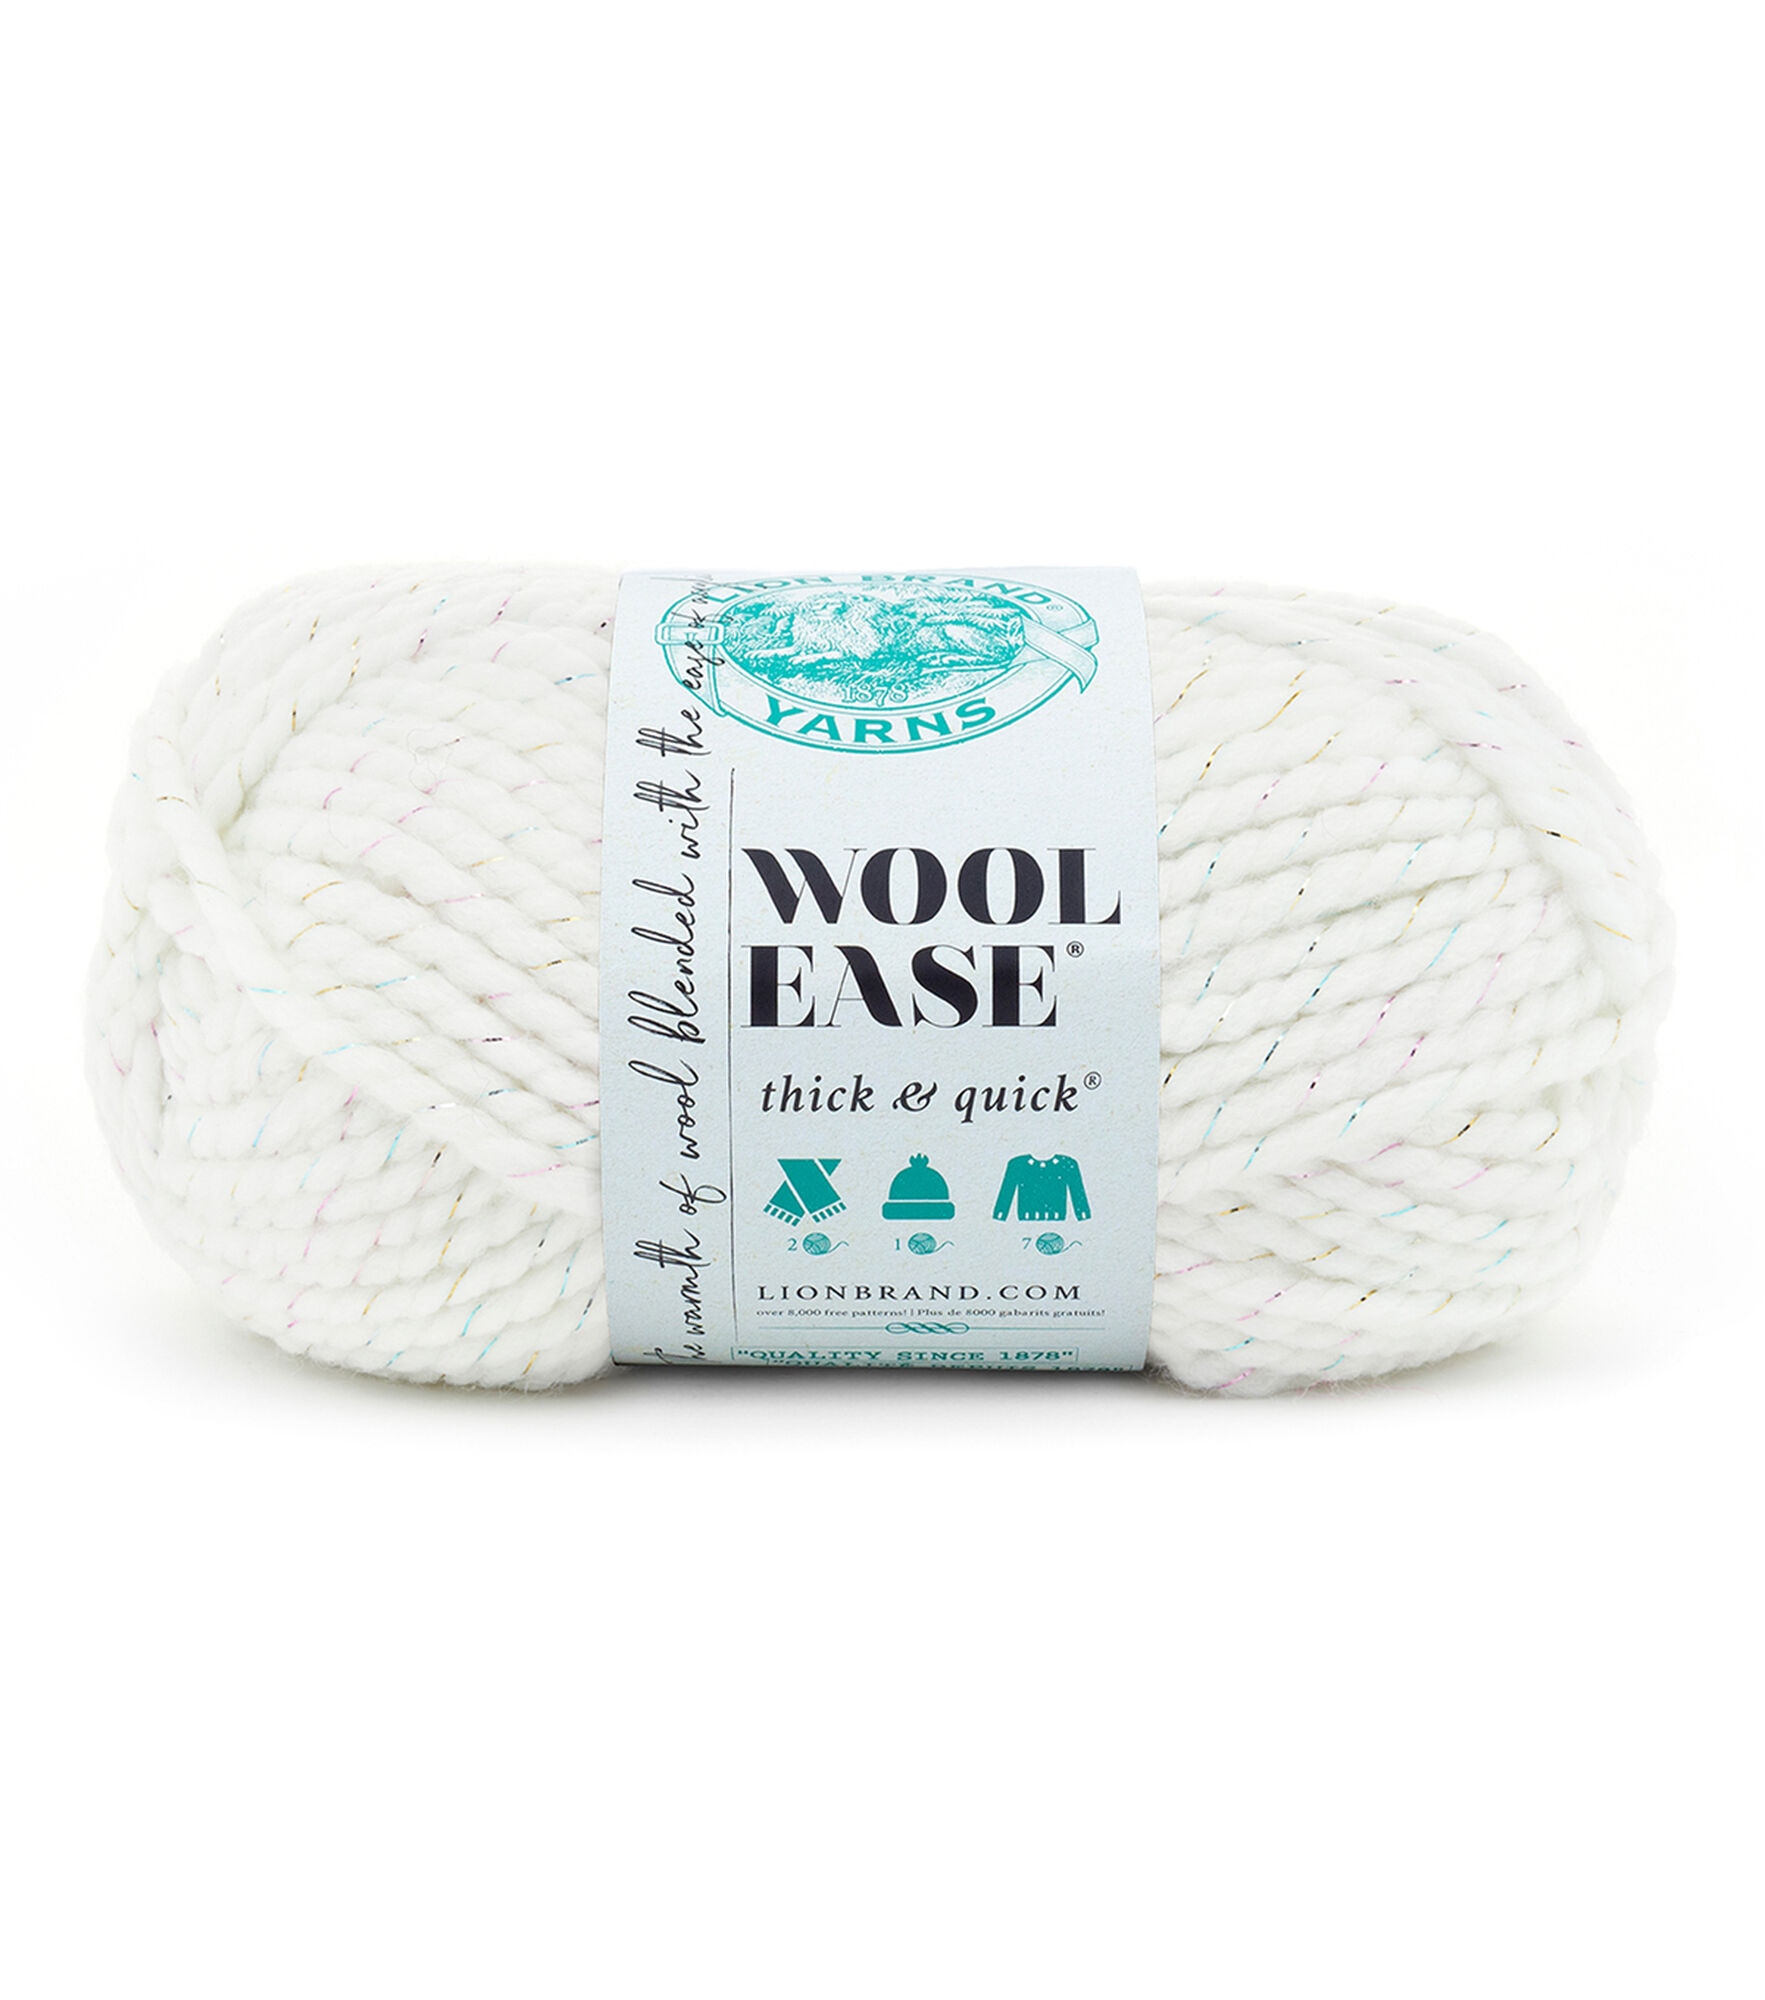 Lion Brand Cover Story Thick & Quick Yarn - Forest Path, 39 Yards